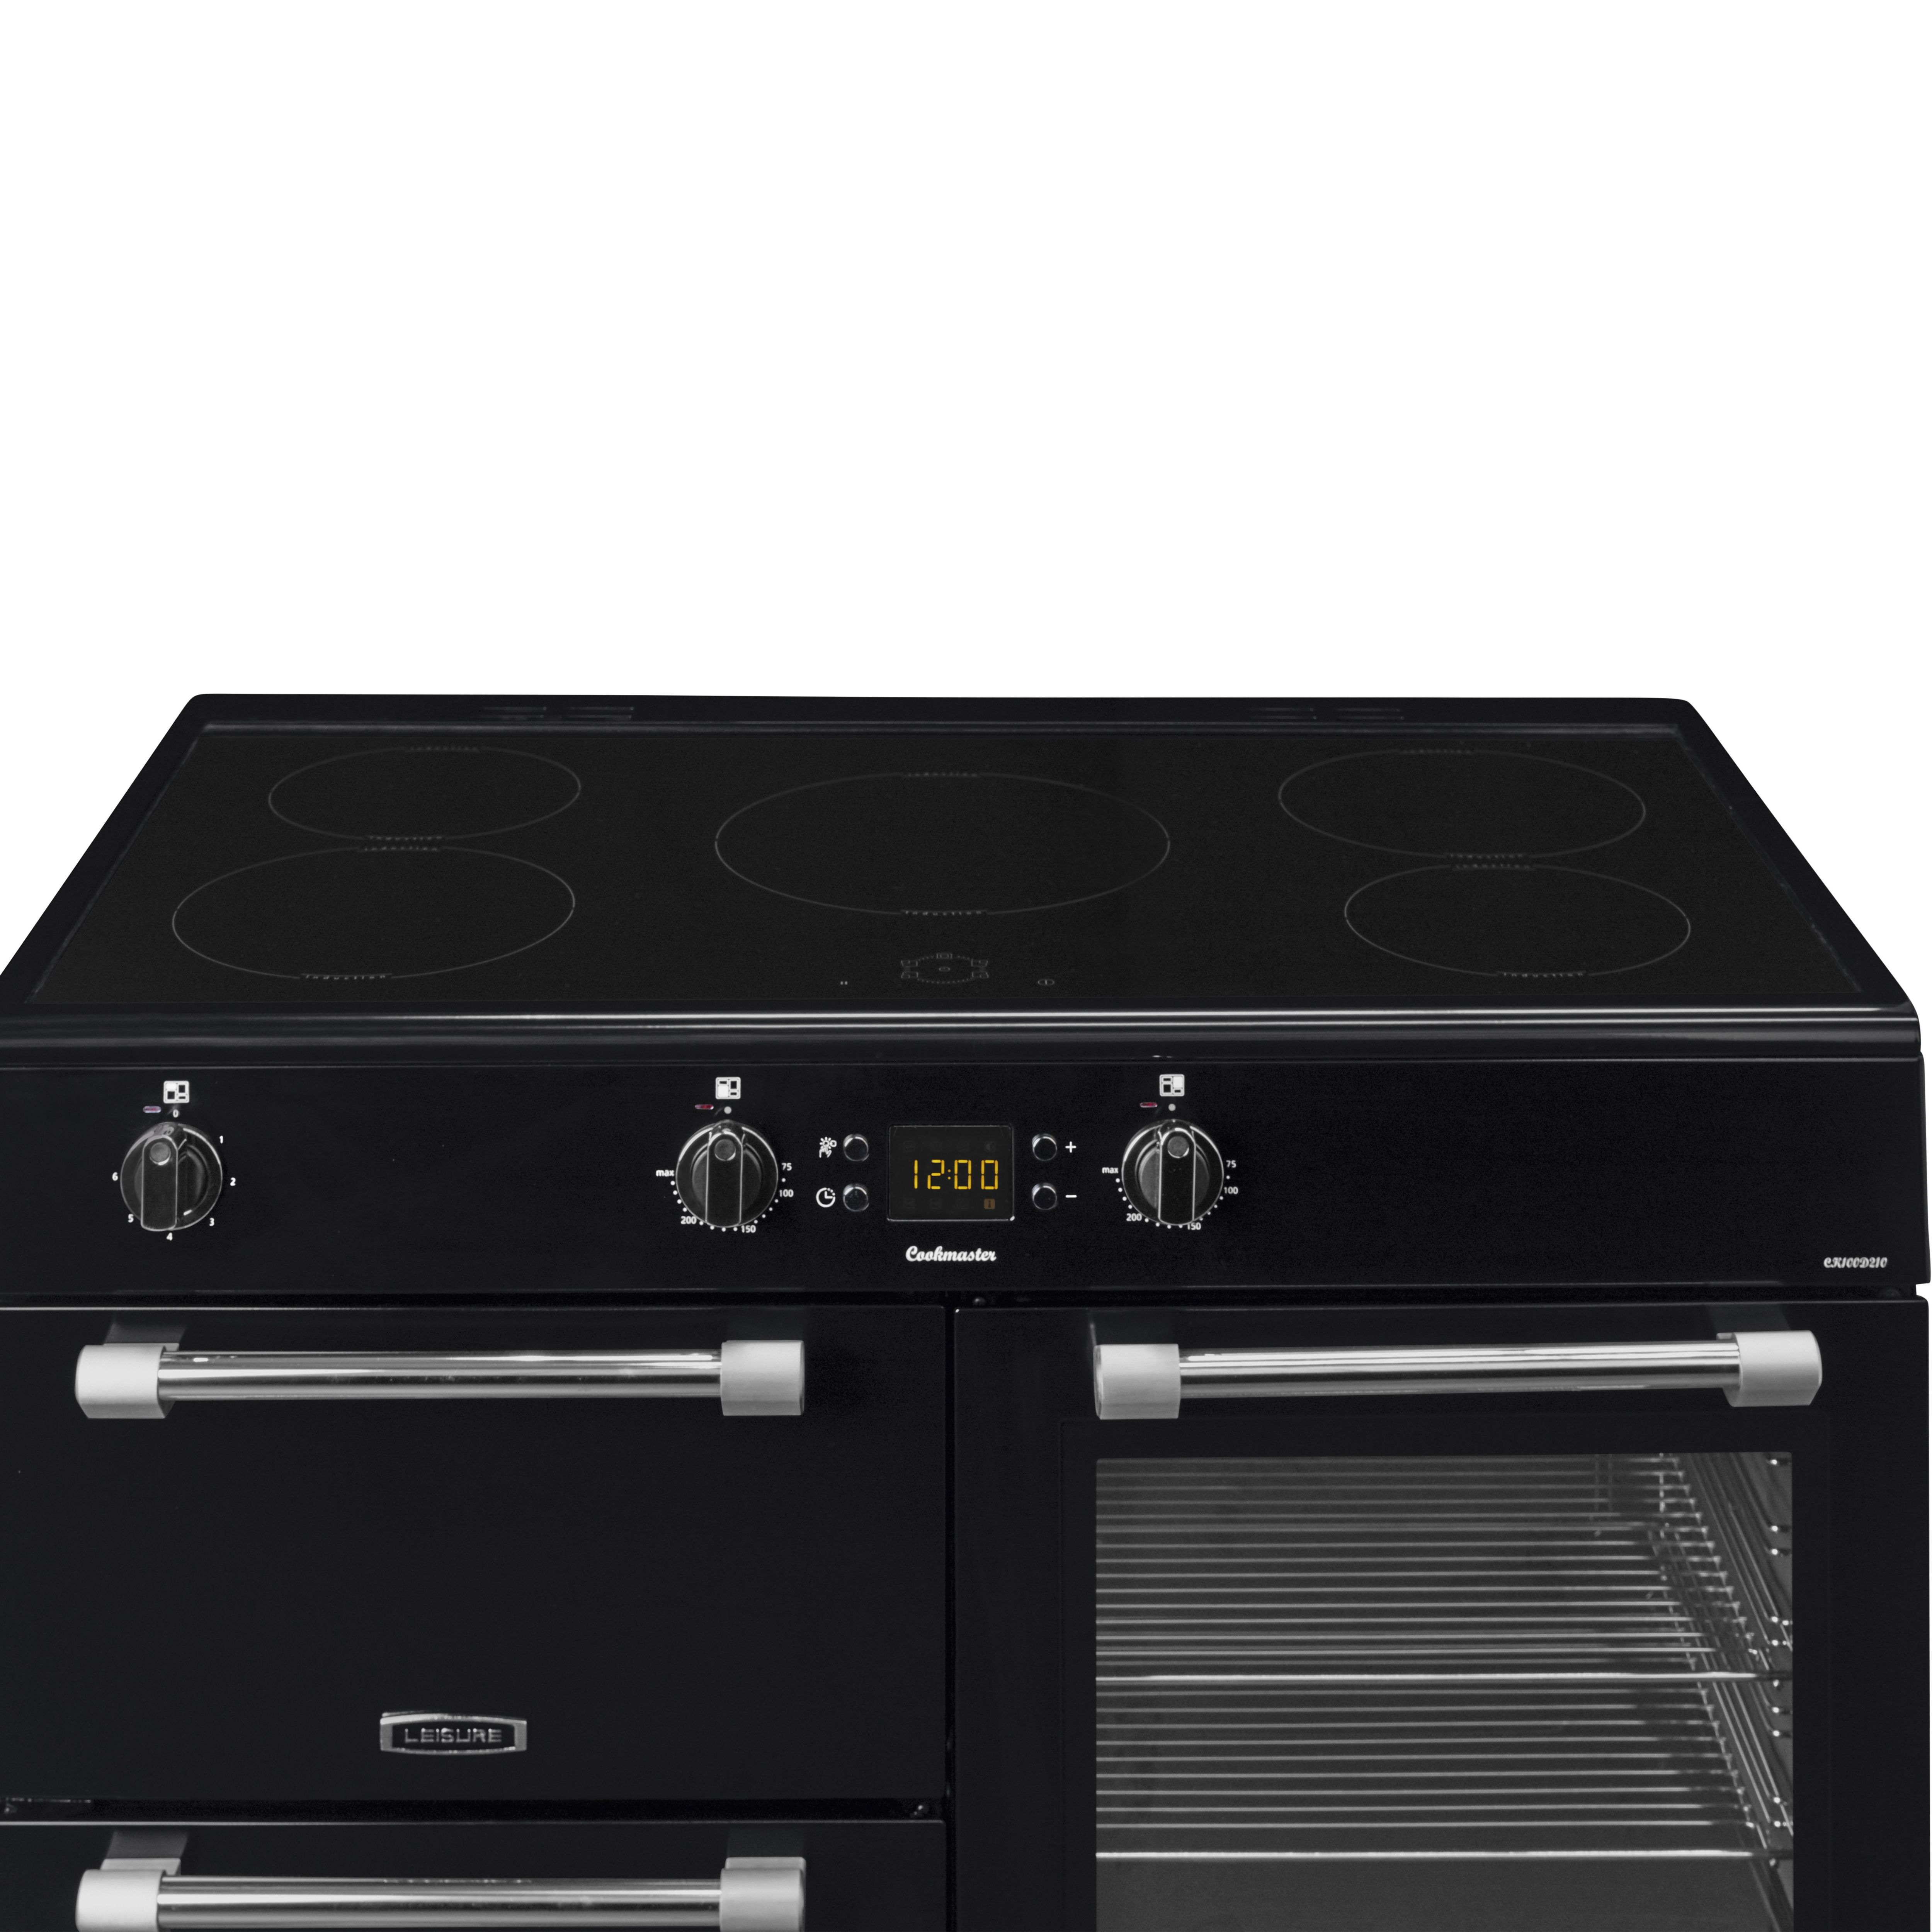 Leisure CK100D210K Freestanding Electric Range cooker with Induction Hob - Black